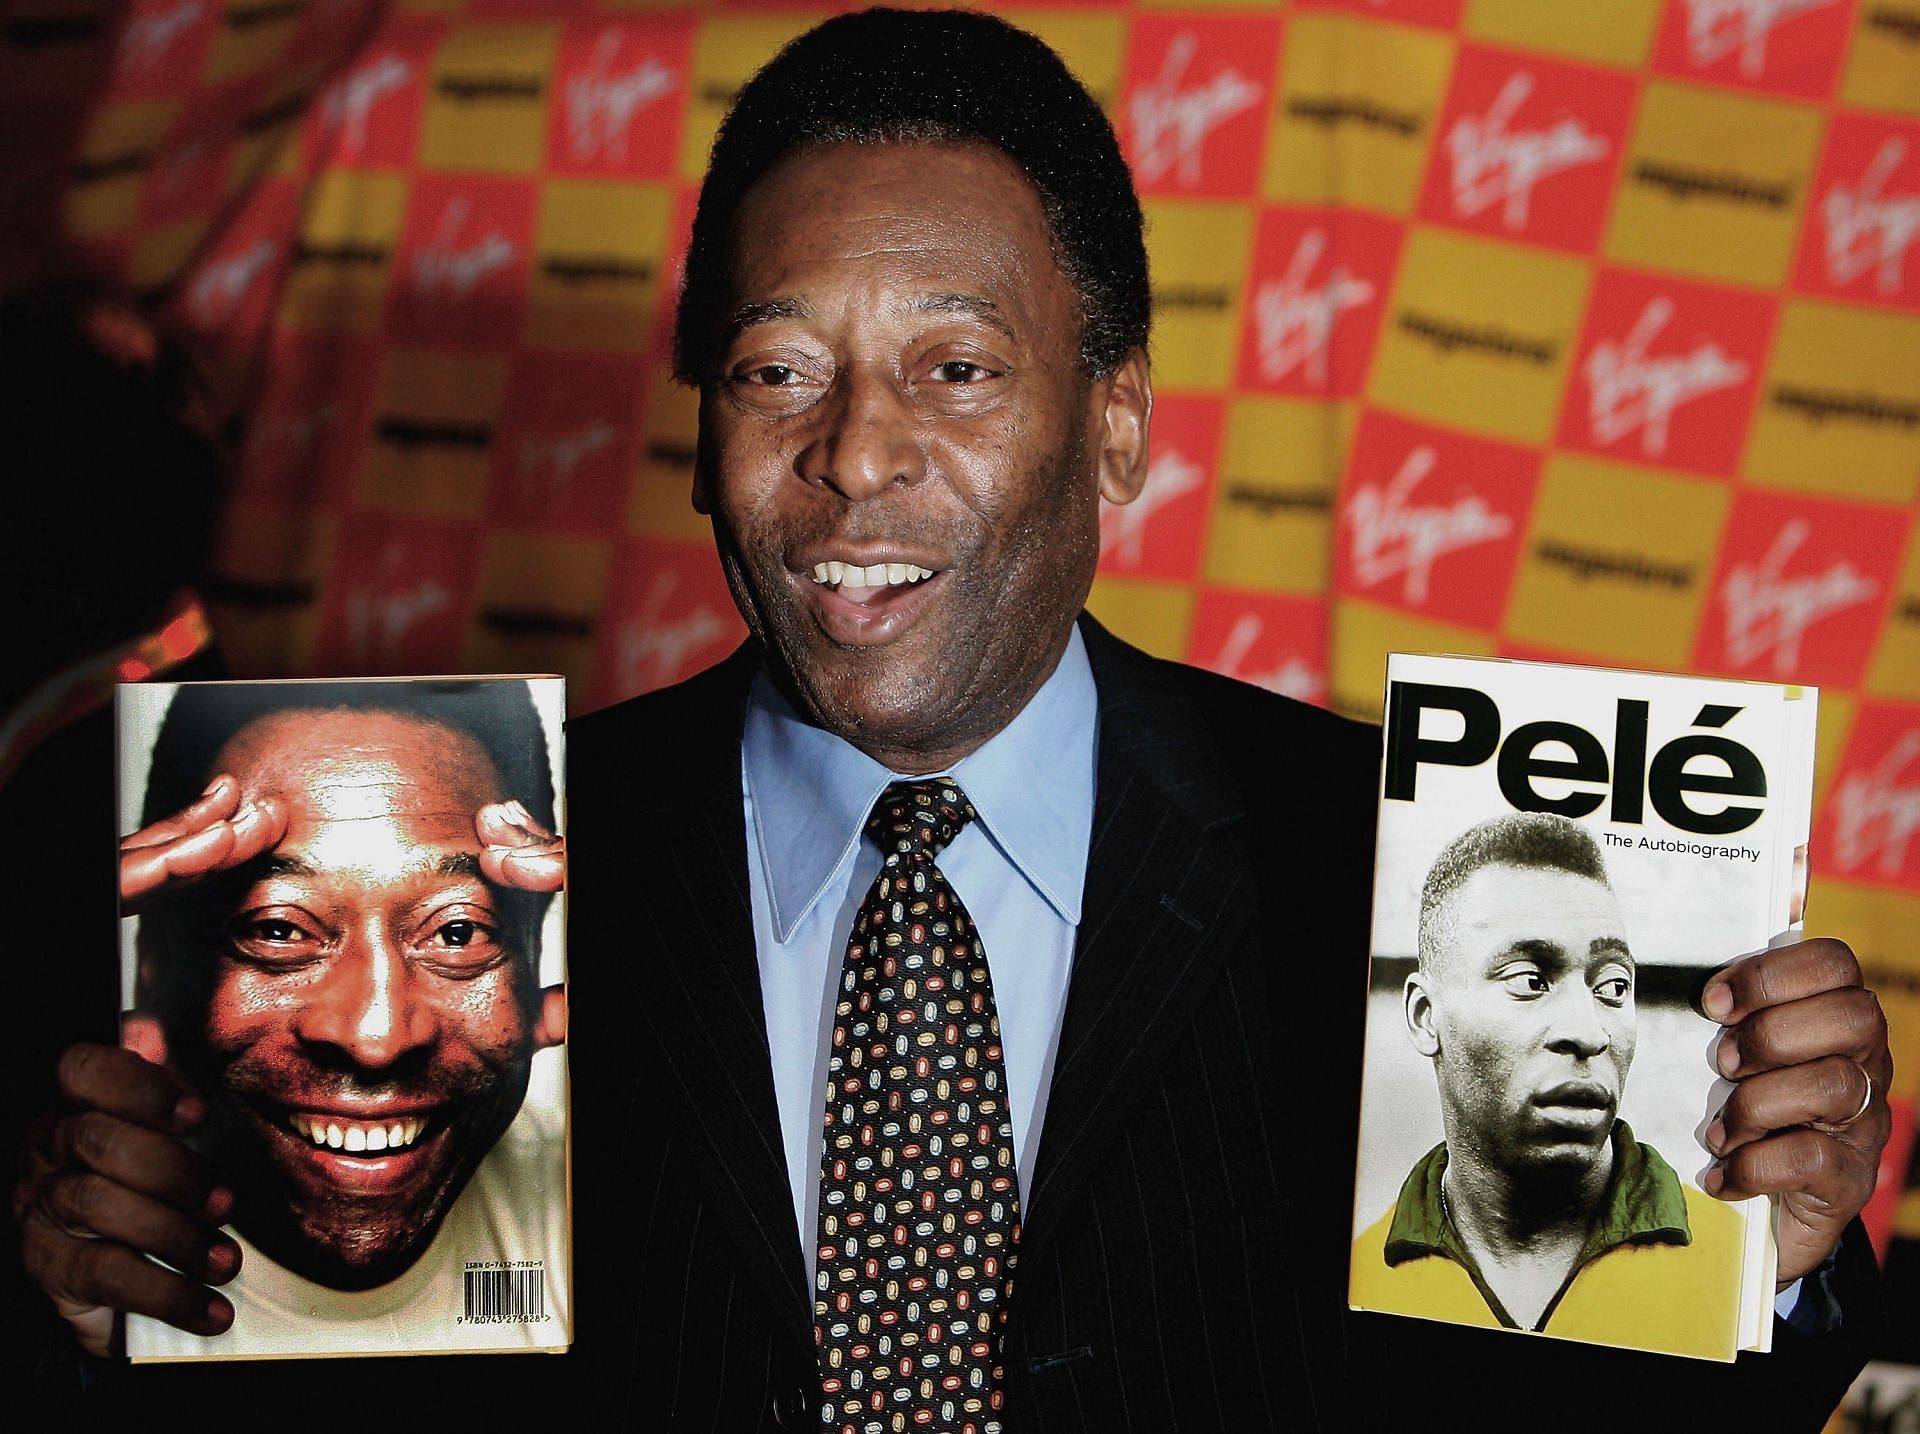 Pele Signs Copies of Autobiography